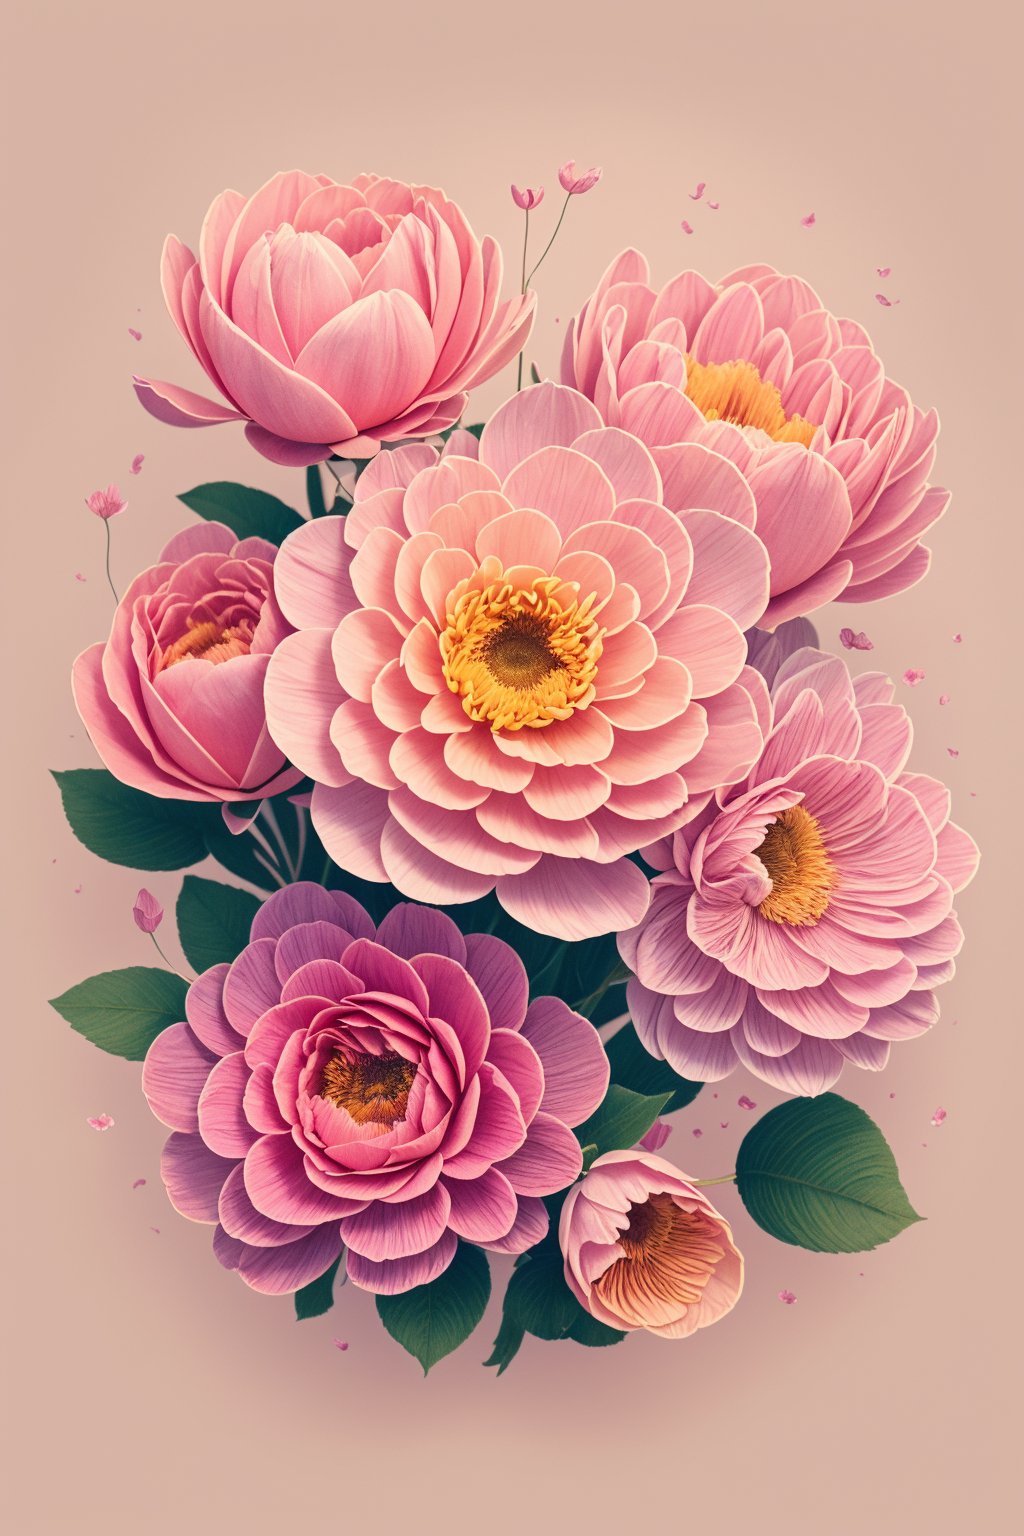 (best quality, highres, ultra-detailed),vector illustration,flower,pastel colors,soft shadows,blooming petals,delicate stems,fresh and vibrant,botanical inspiration,dreamy atmosphere,artistic details,nature-inspired,subtle gradients,fine lines,detailed texture,garden beauty